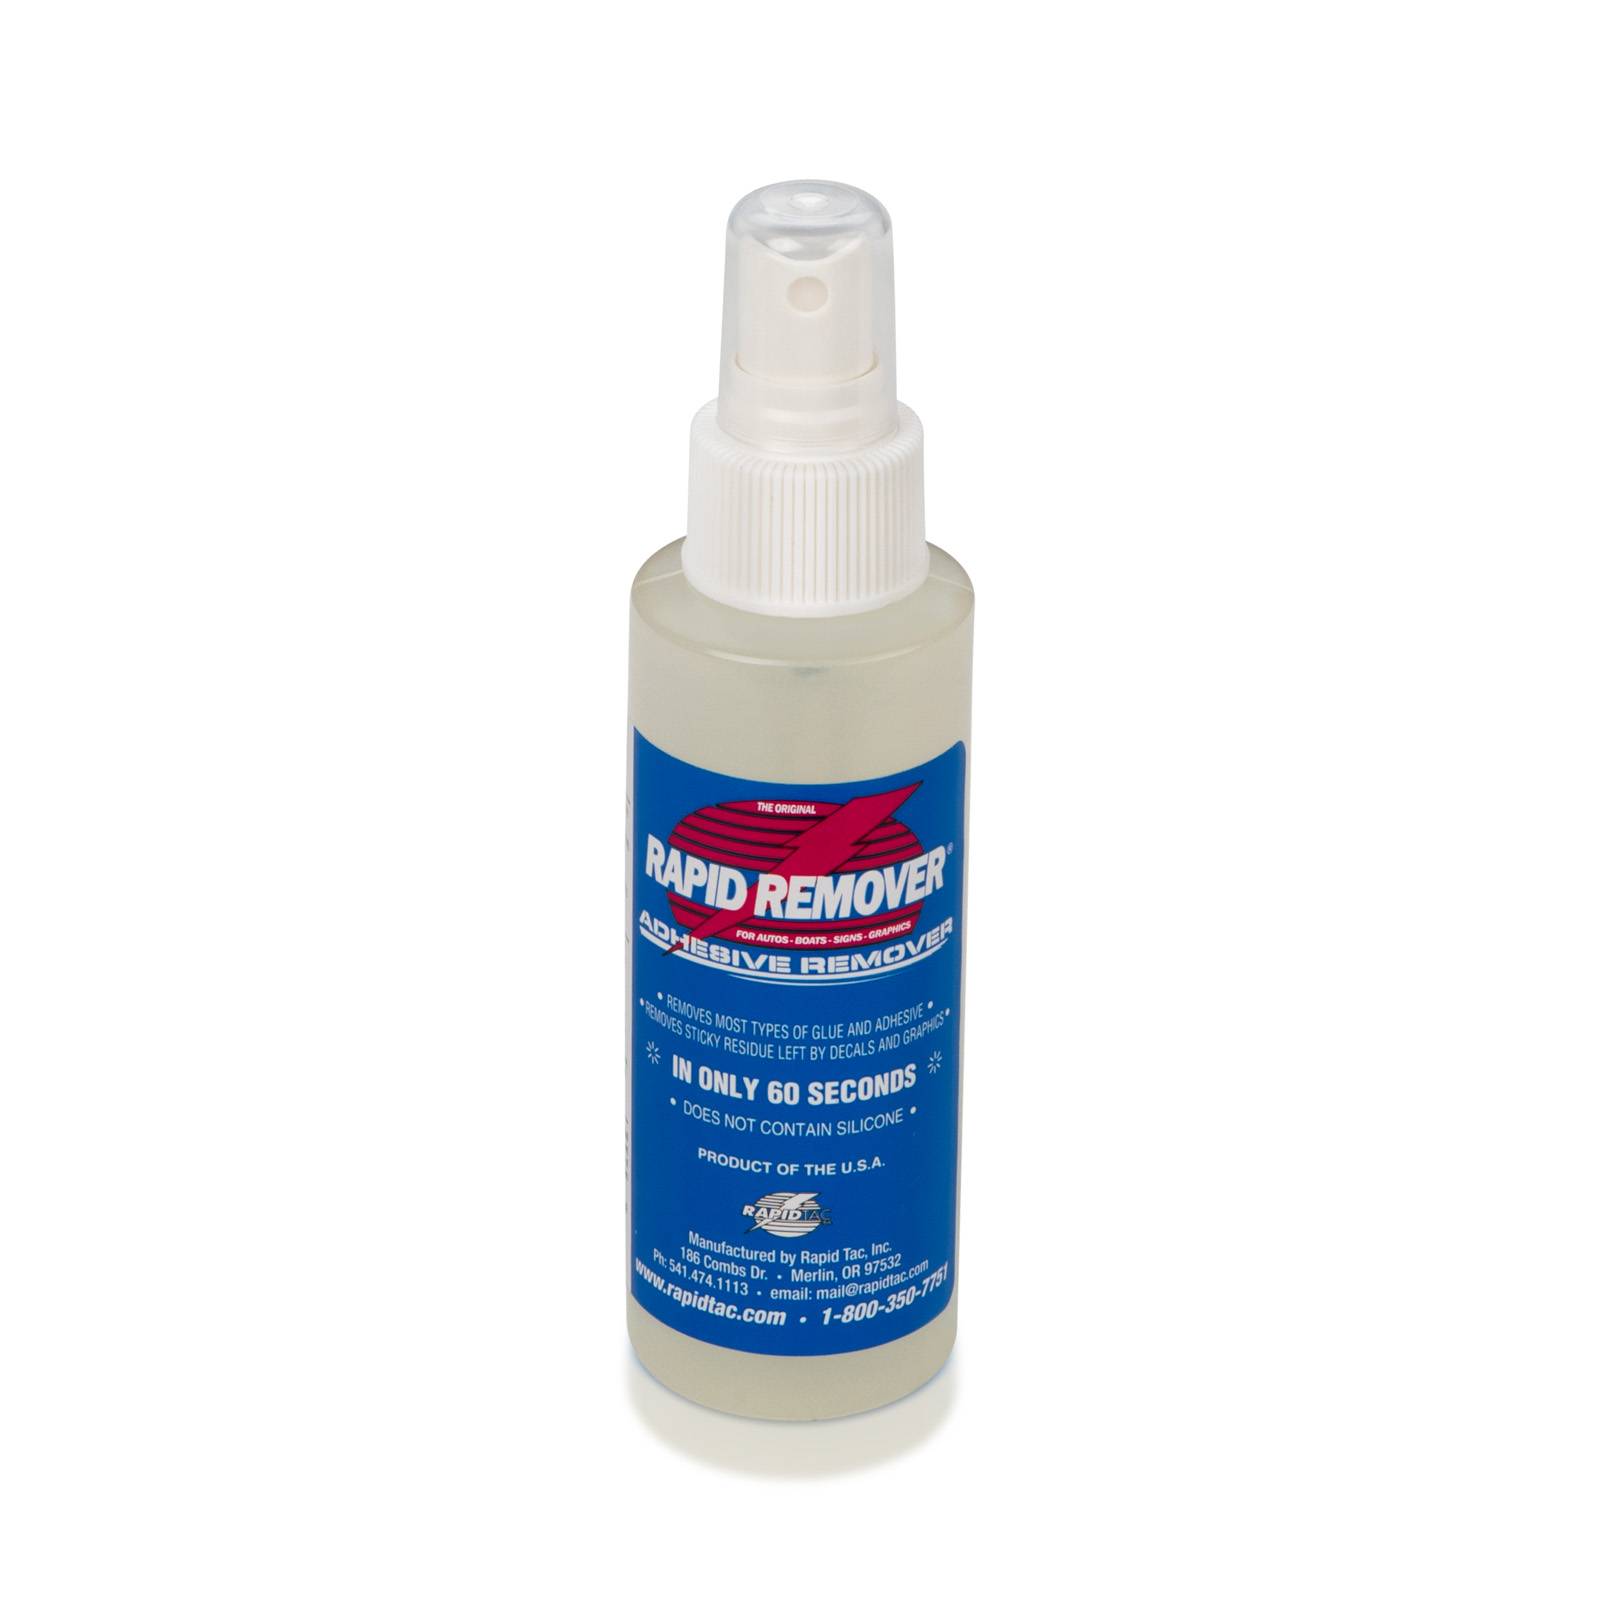 Rapid Tac Rapid Remover, No Mess or Damage Adhesive Remover, 4oz Spray  Bottle